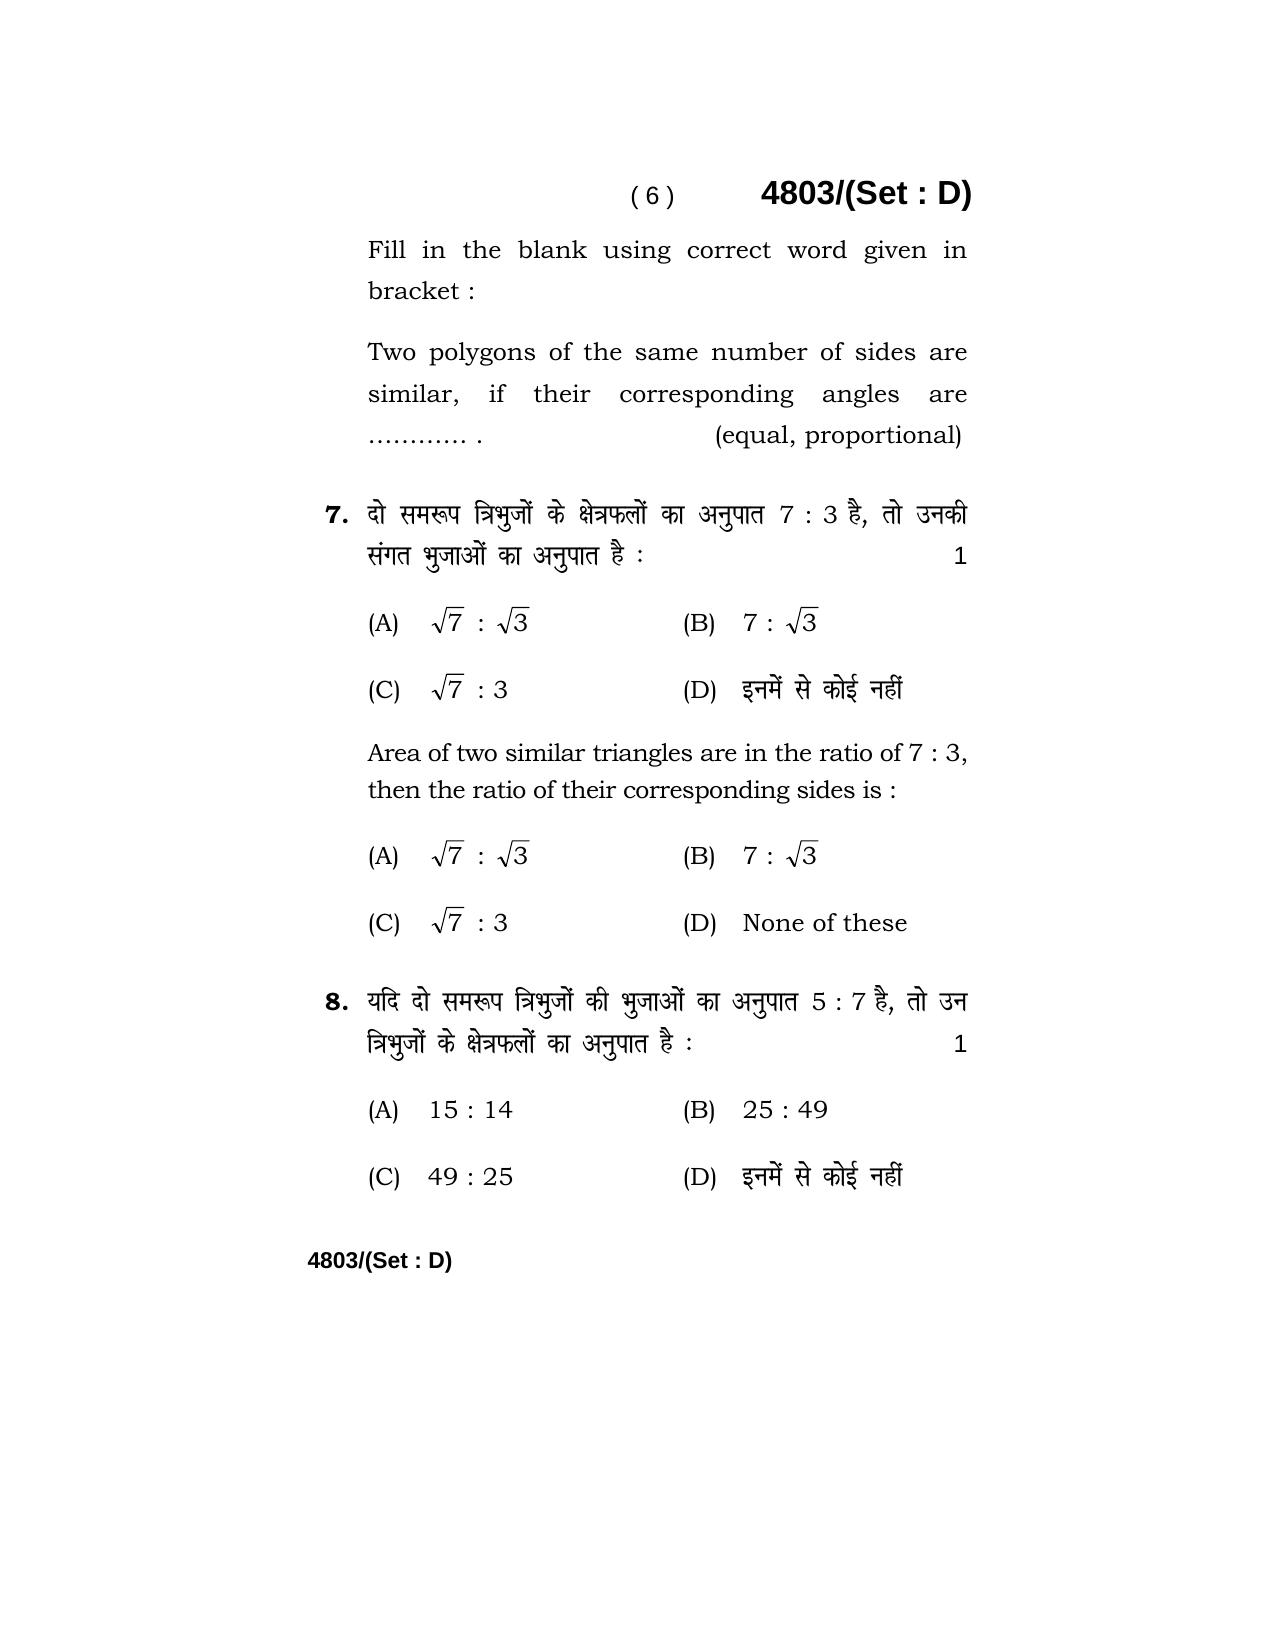 Haryana Board HBSE Class 10 Mathematics 2020 Question Paper - Page 54